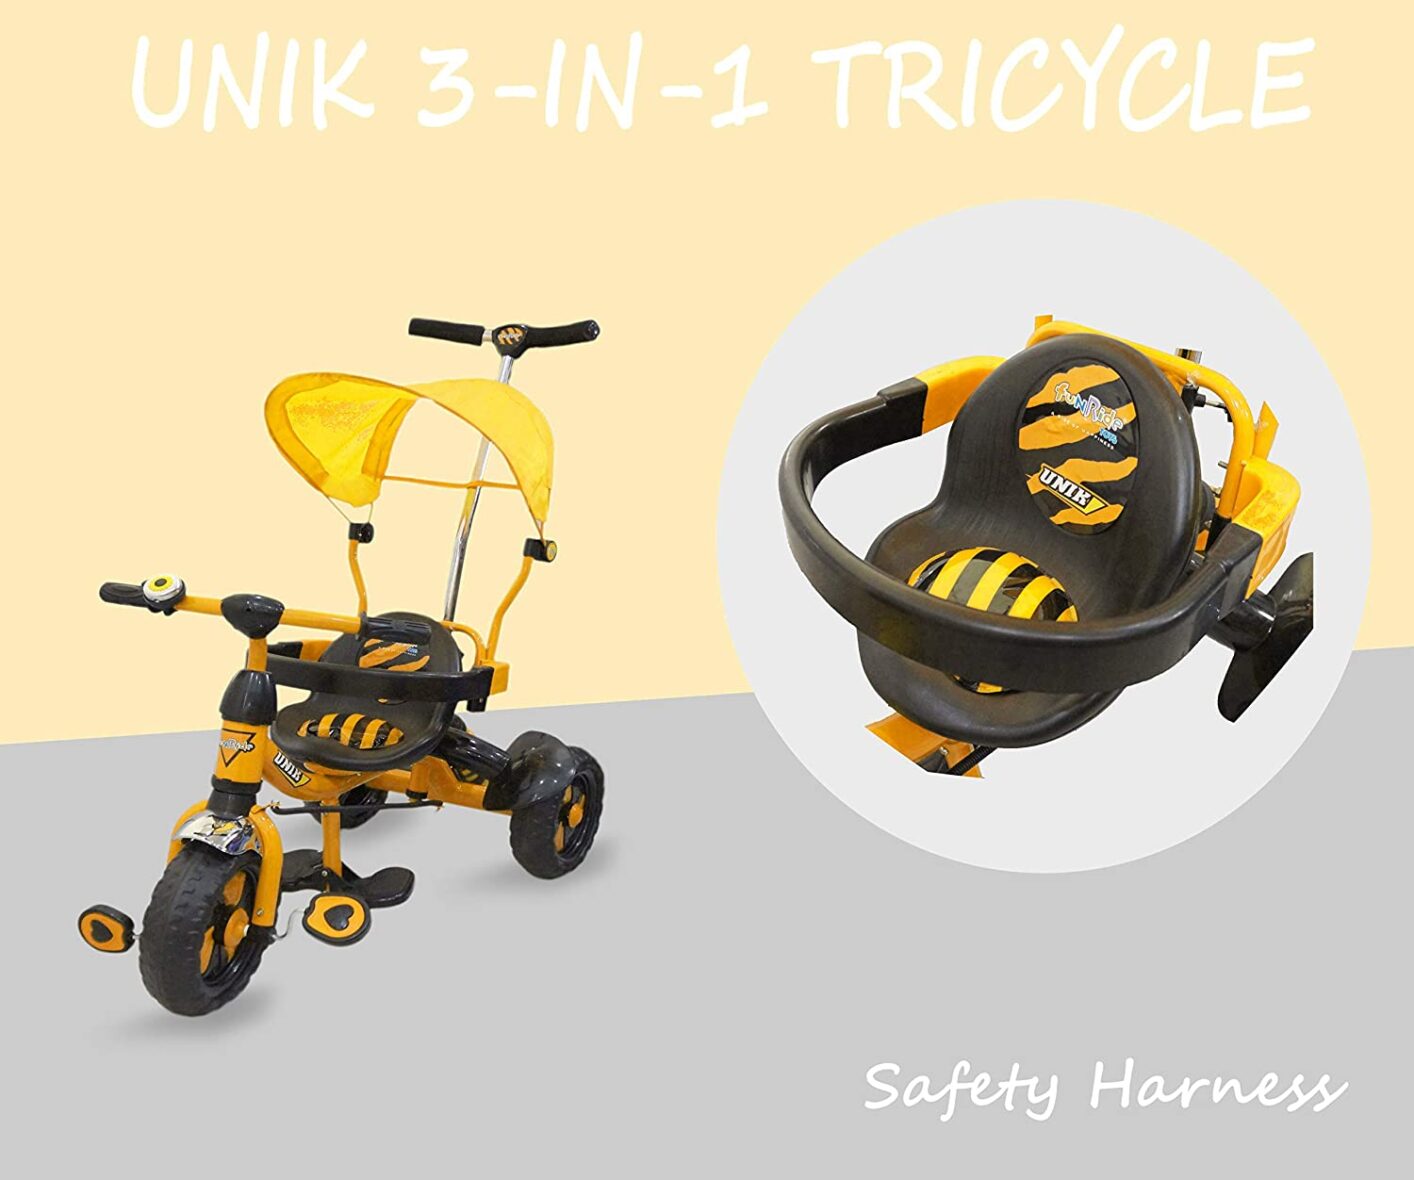 Fun Ride Baby Tricycle Unik Deluxe Rider 1 to 4 Years (22)